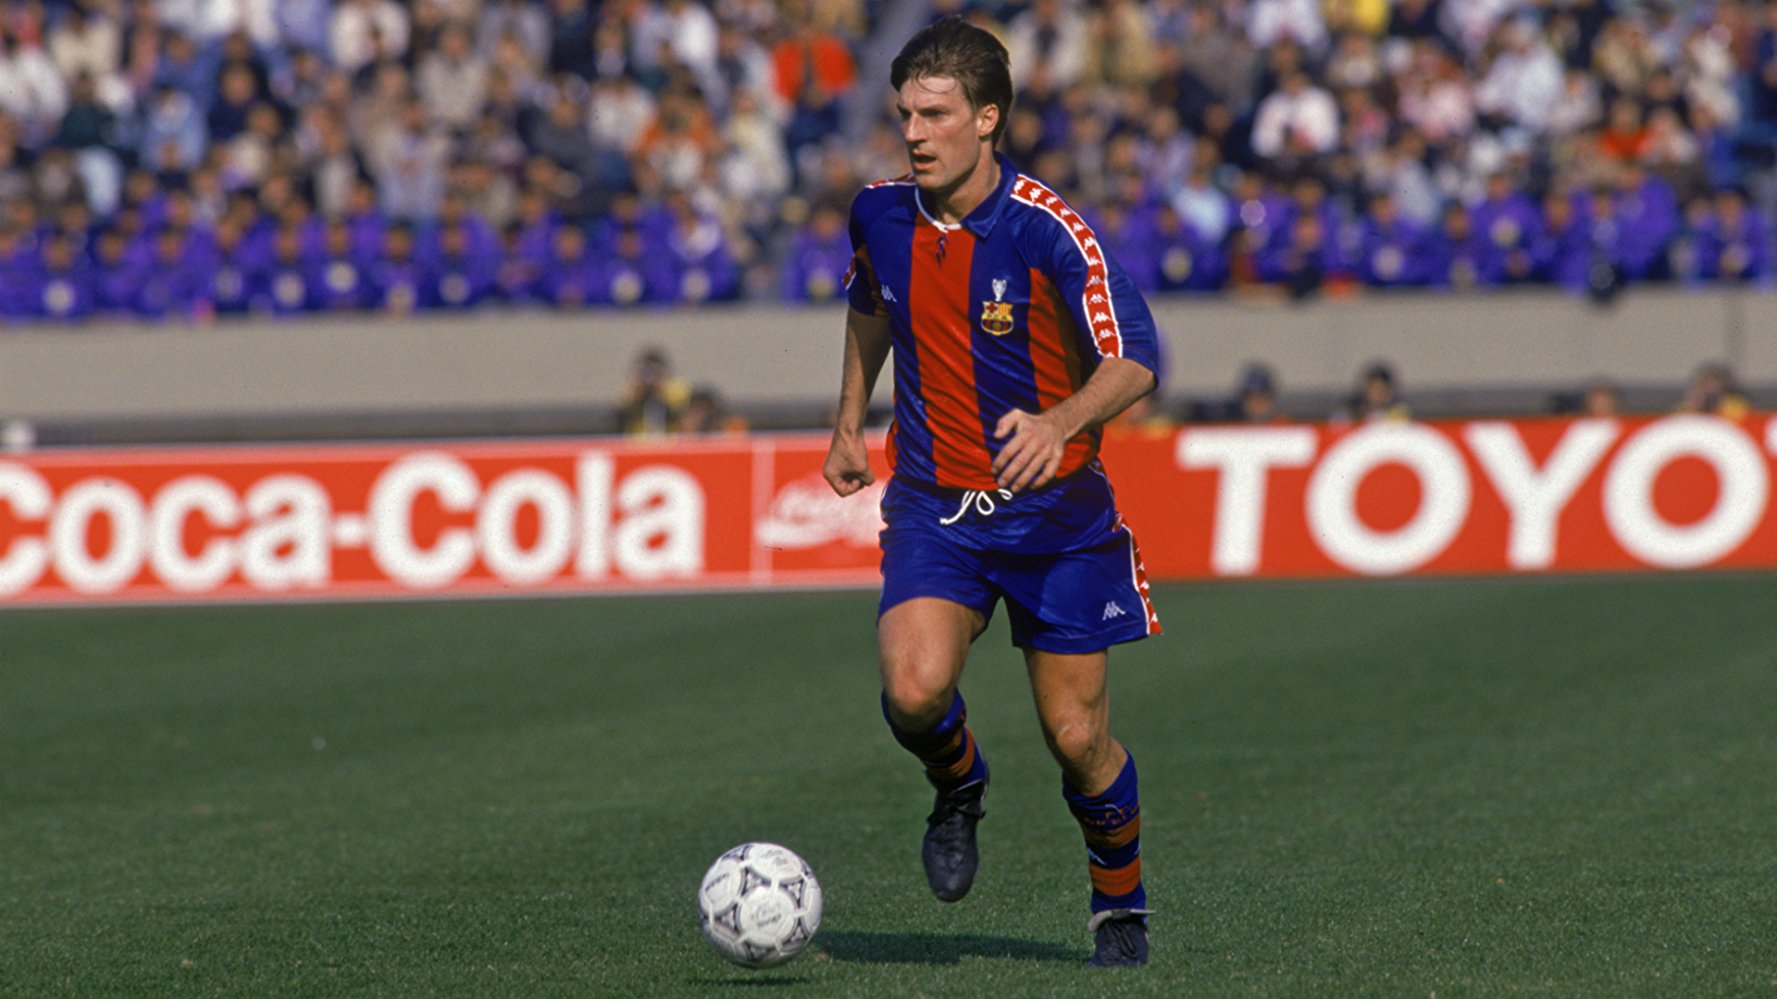 We wish Michael Laudrup (ex-Barca) a very happy birthday. He turns 54 today. 